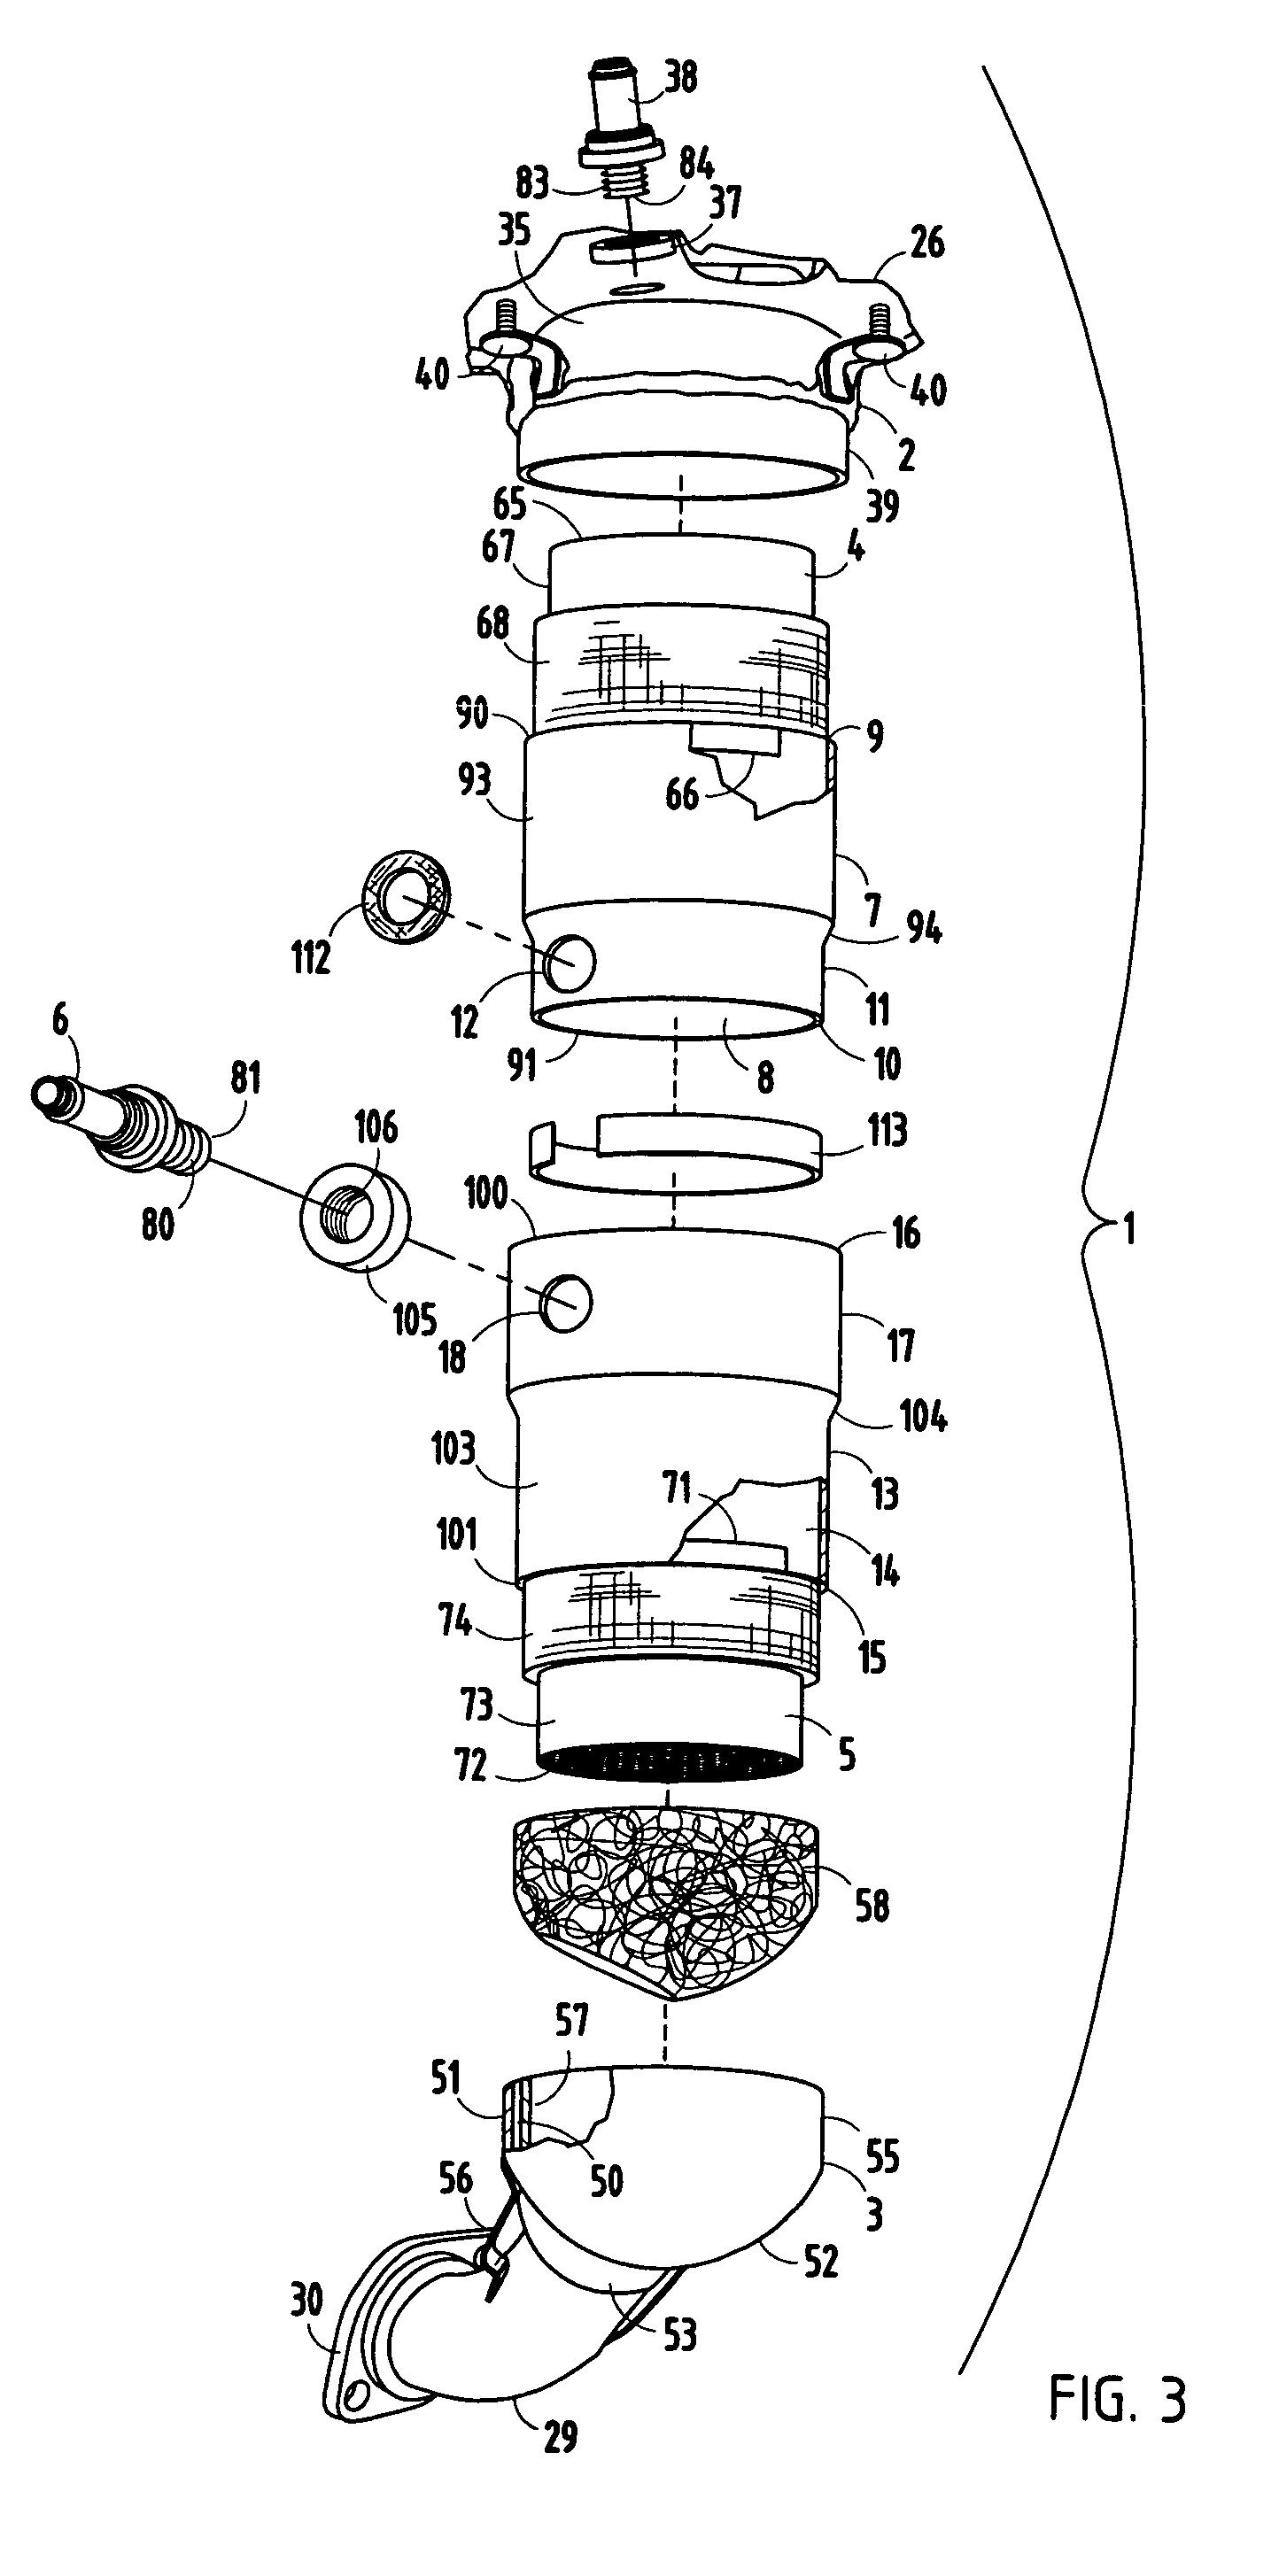 Exhaust gas treatment device with insulated housing construction